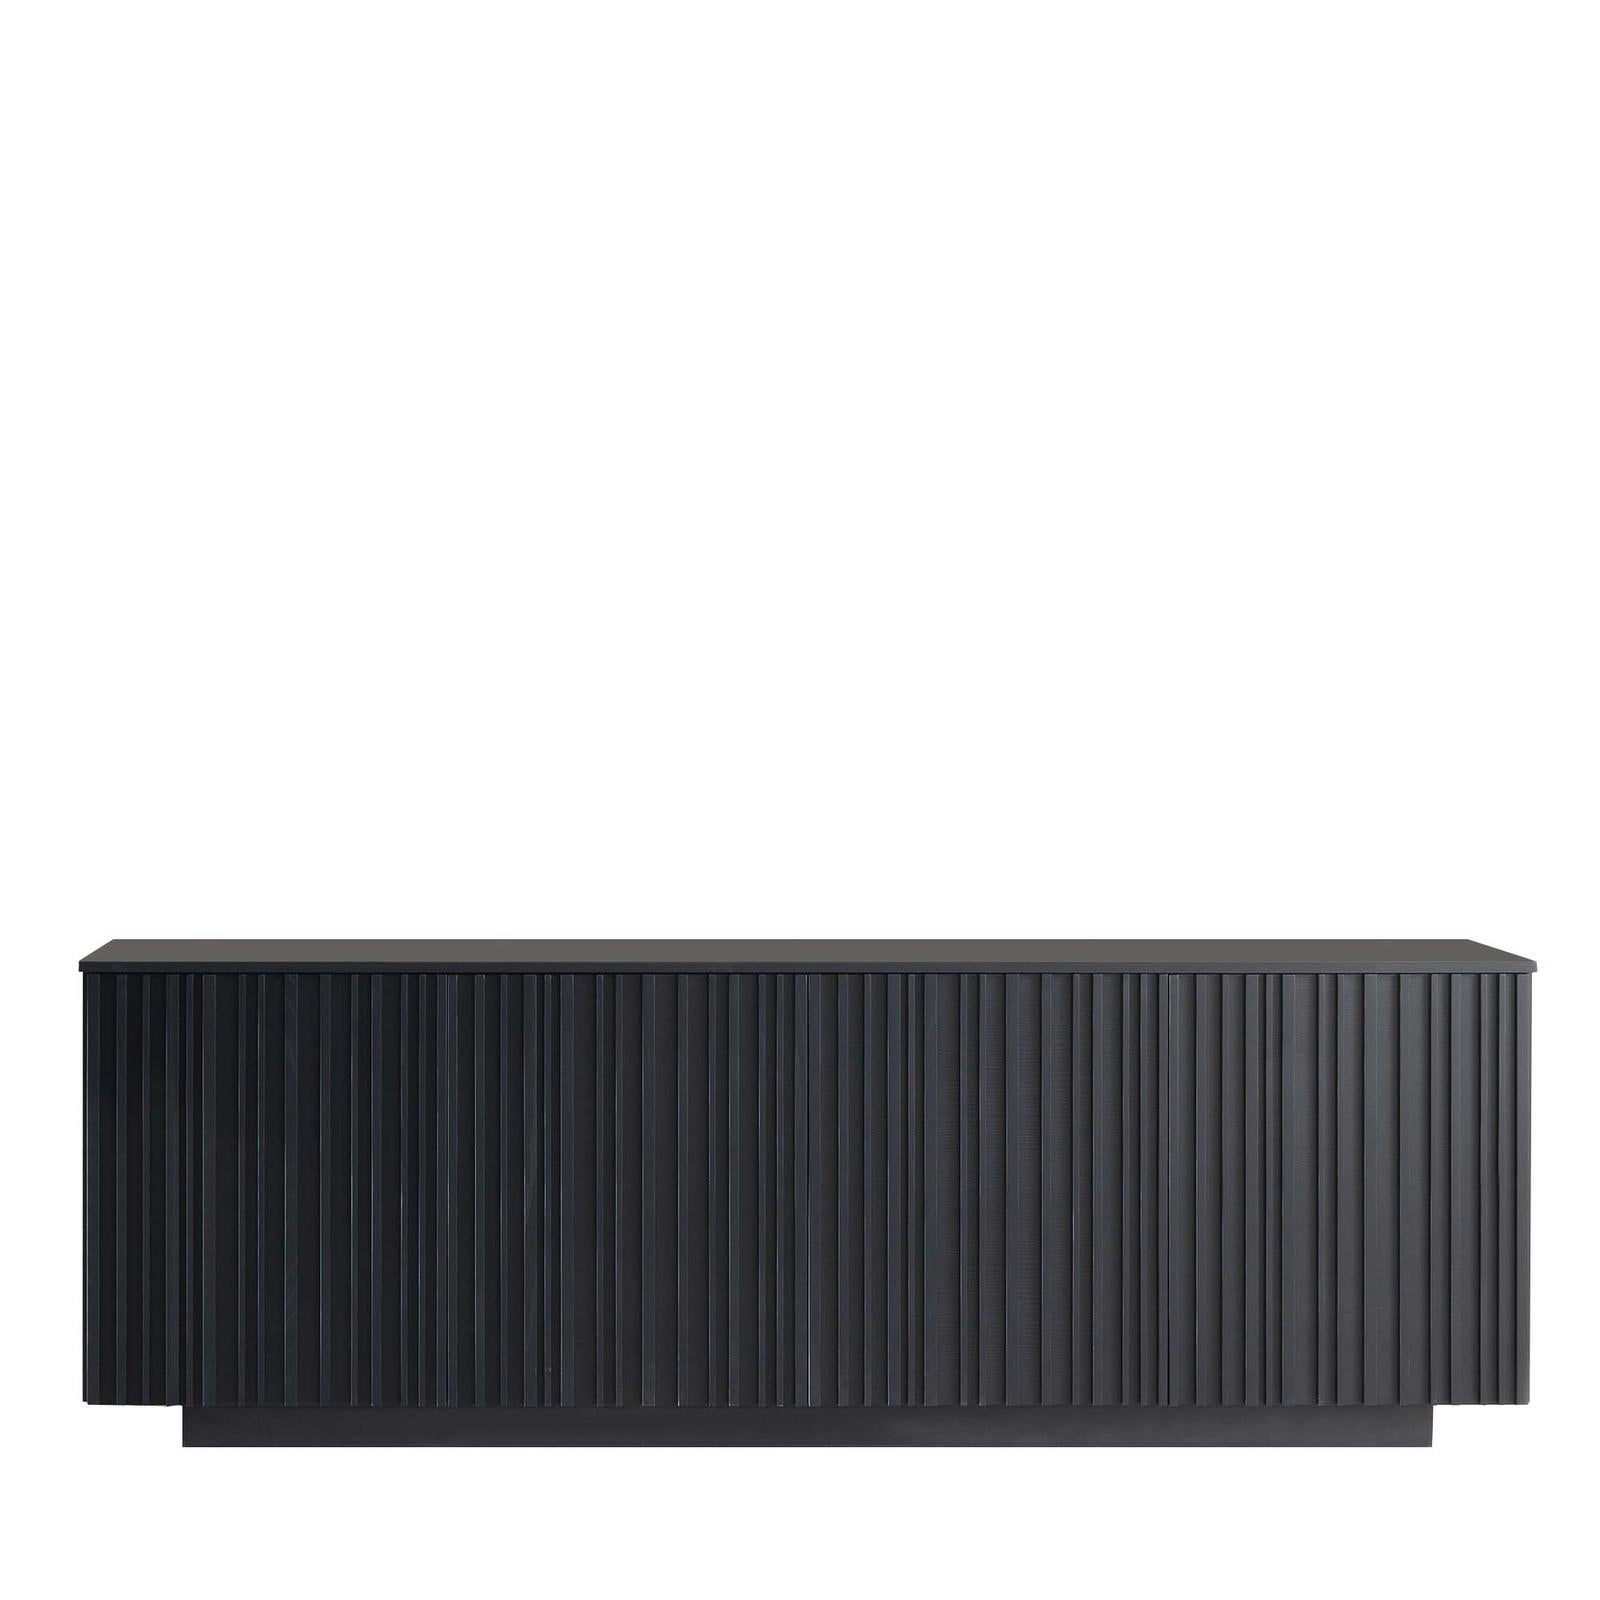 Resting on a smaller wooden base, this exquisite, black, rectangular sideboard by Giuliano Cappelletti focuses on the geometrical elements of the line, whose almost hypnotic, vertical repetition on the sideboard's front doors undoubtedly lends this